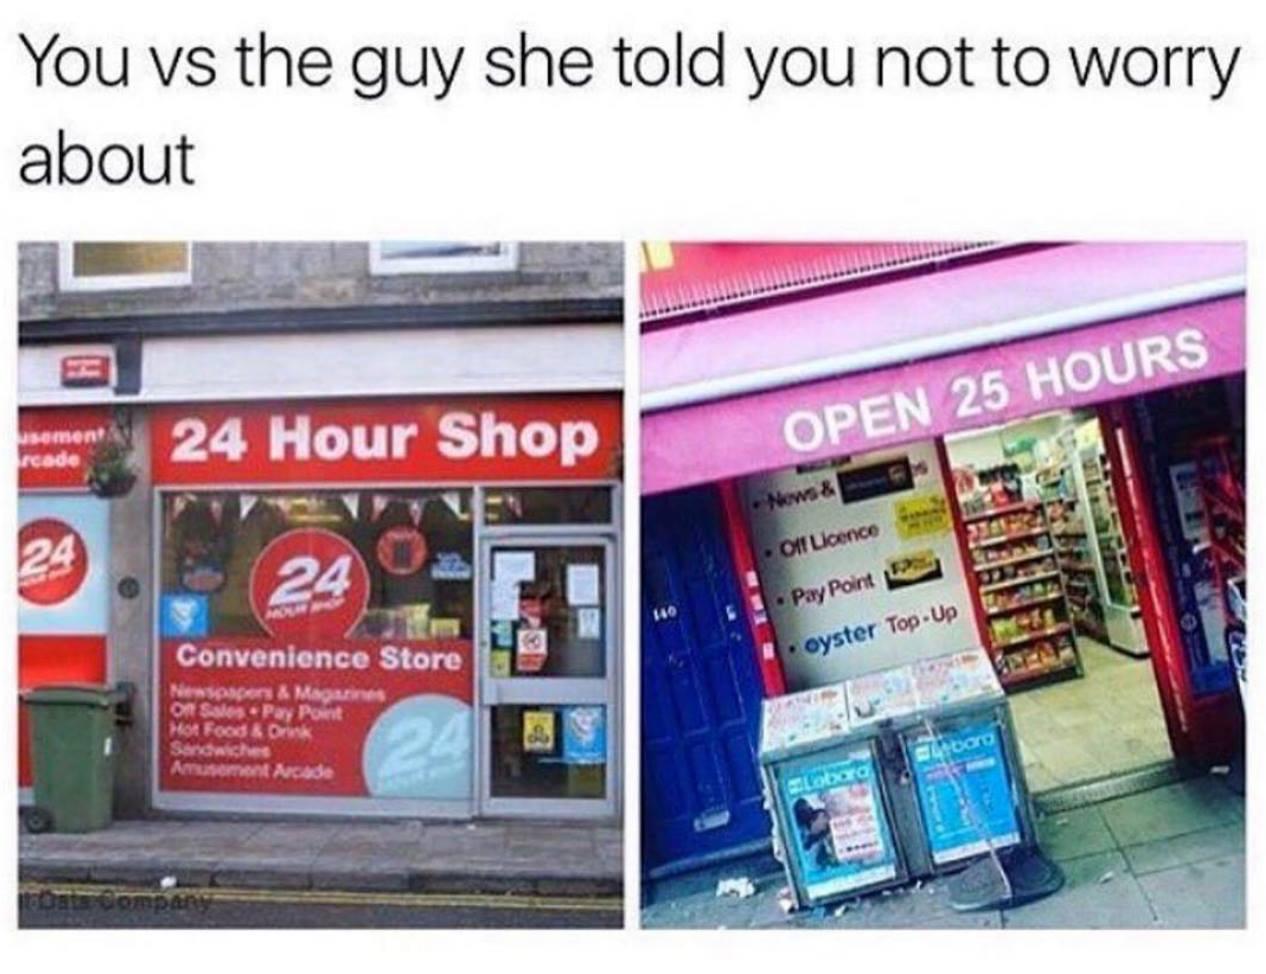 funny memes and pics - display advertising - You vs the guy she told you not to worry about sement 24 Hour Shop 24 24 Convenience Store Newspapers & Magazines Off Sales Pay Point Hot Food & Drink Sandwiches Amusement Arcade Data Company 24 Open 25 Hours N